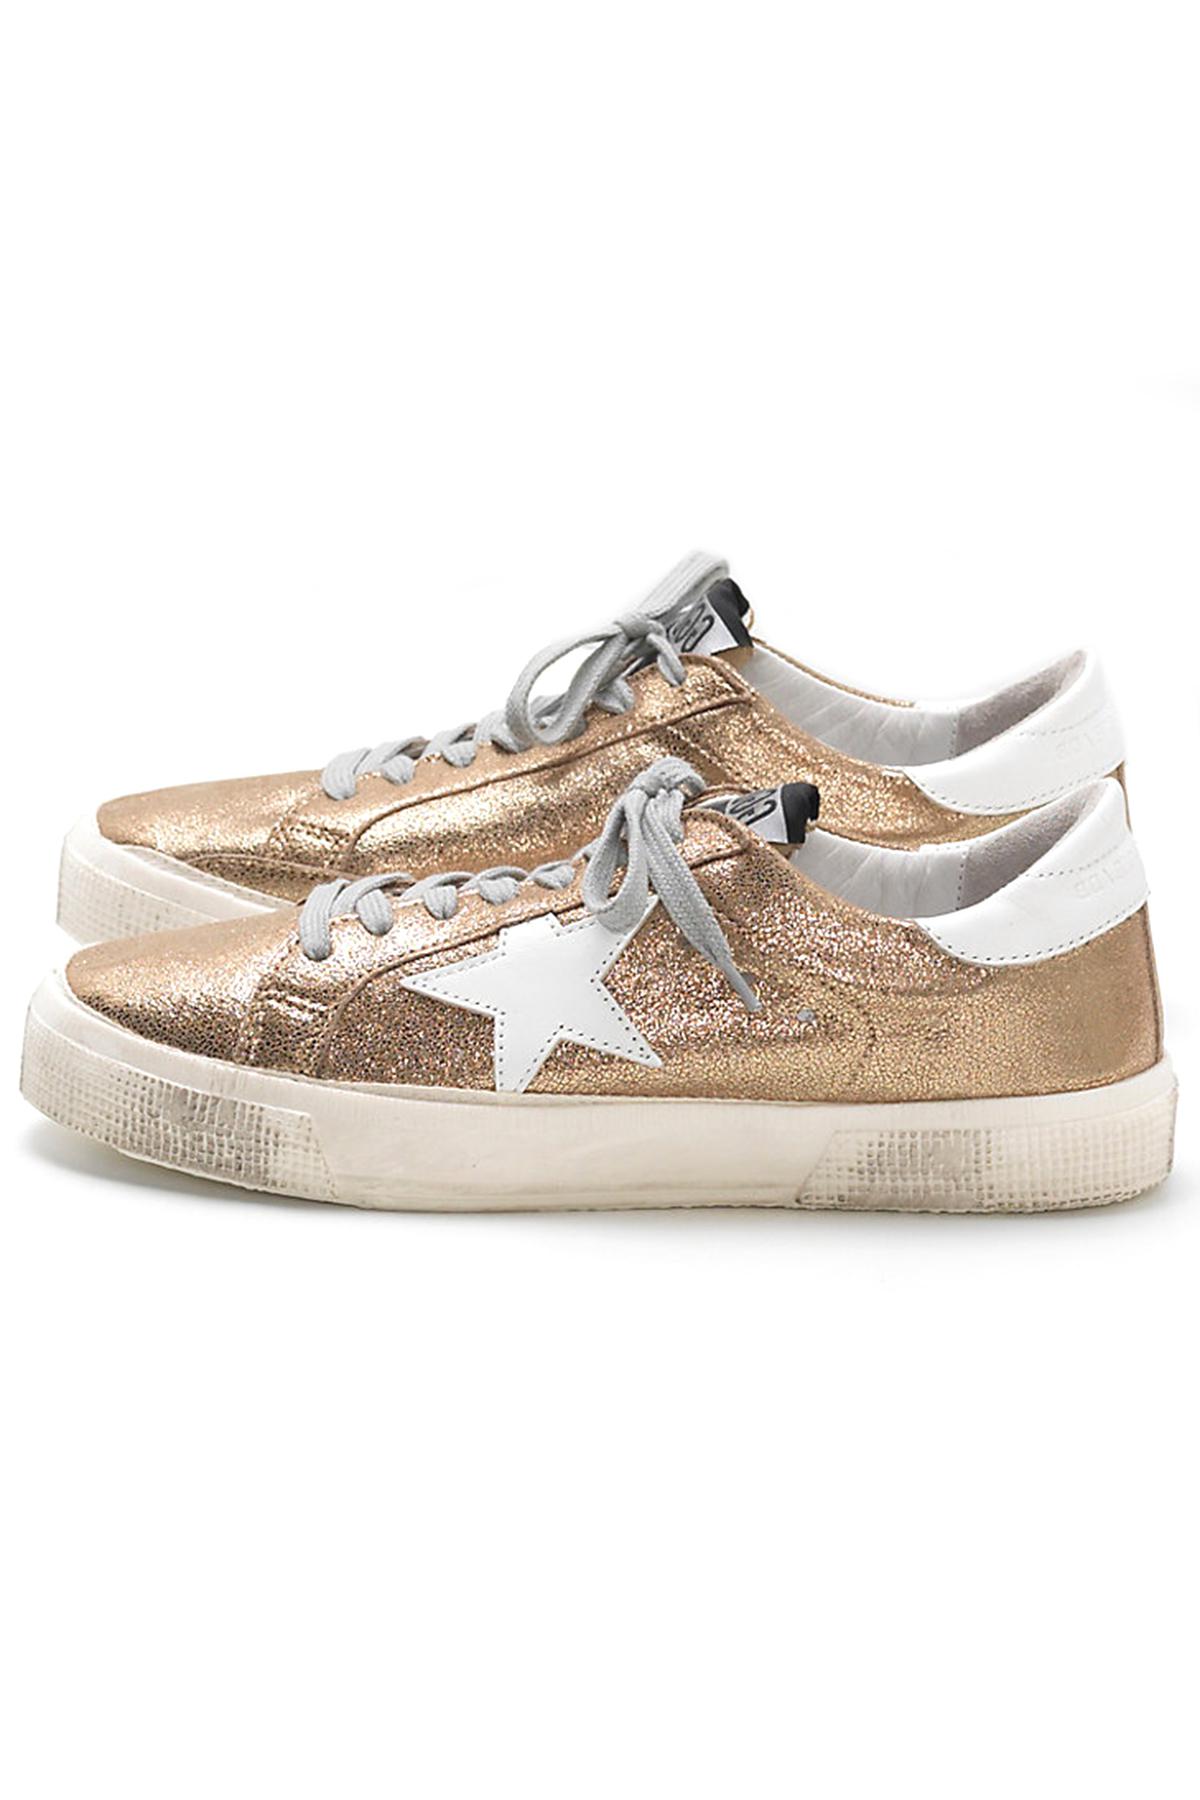 Golden Goose May Cracked Leather Sneakers Gold (Metallic) - Lyst